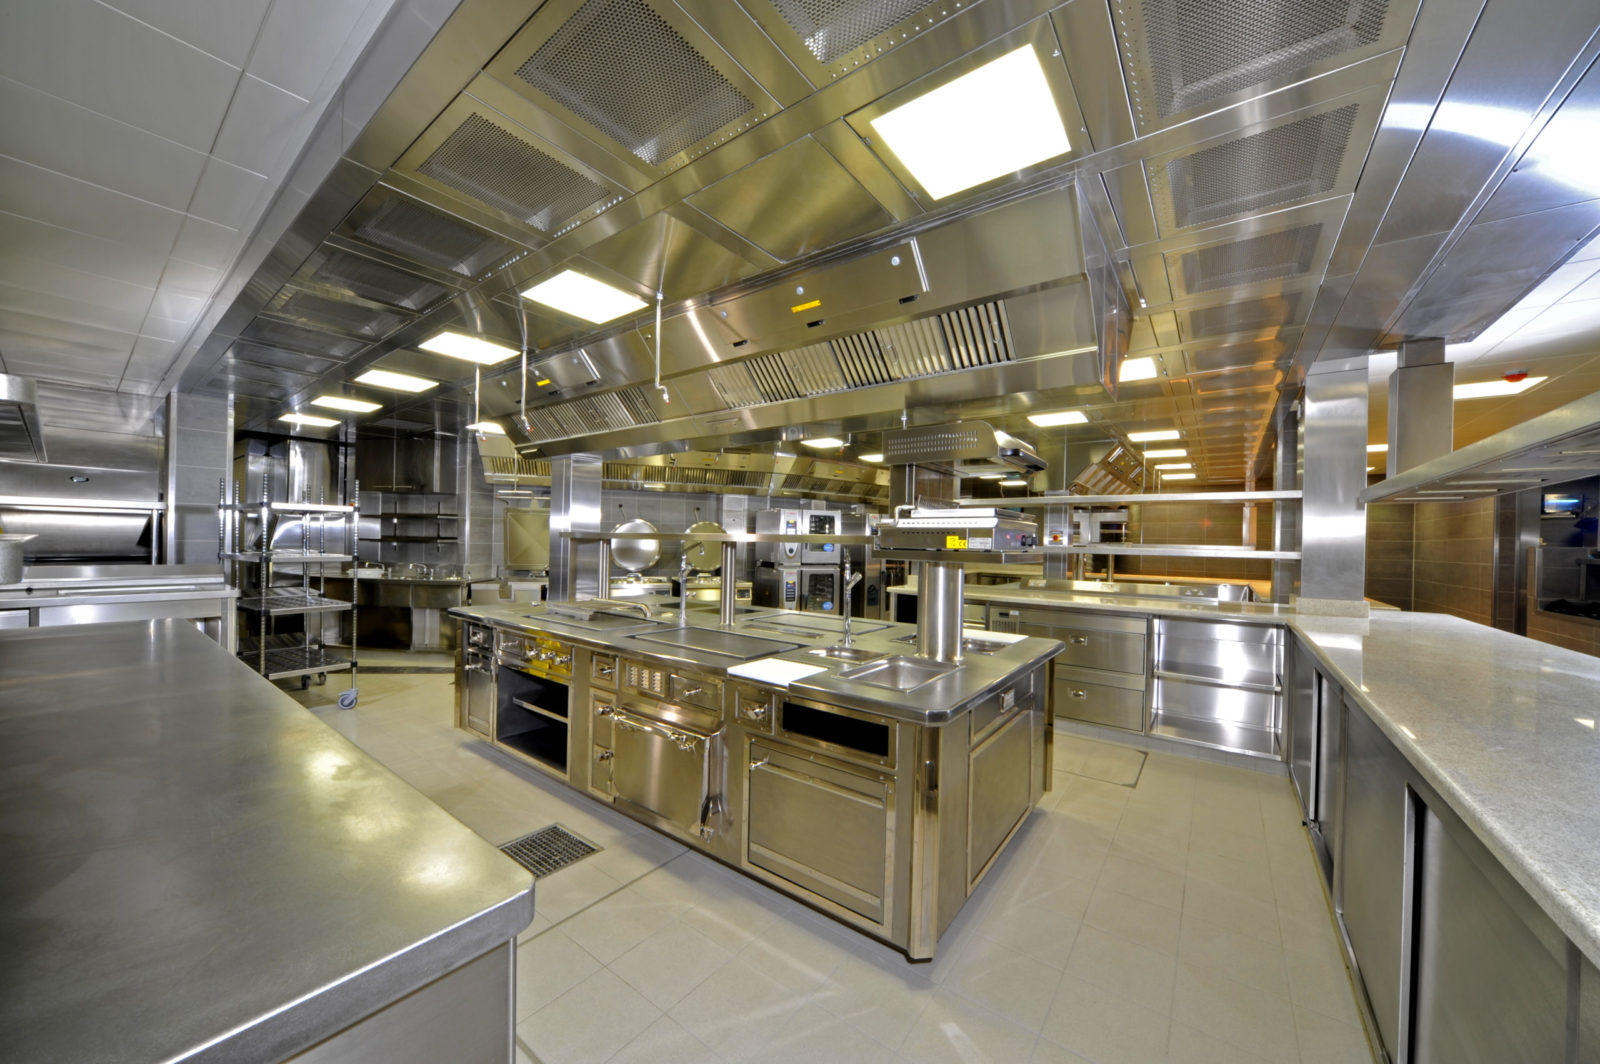 What will kitchen design look like post COVID-19? - Tricon Foodservice